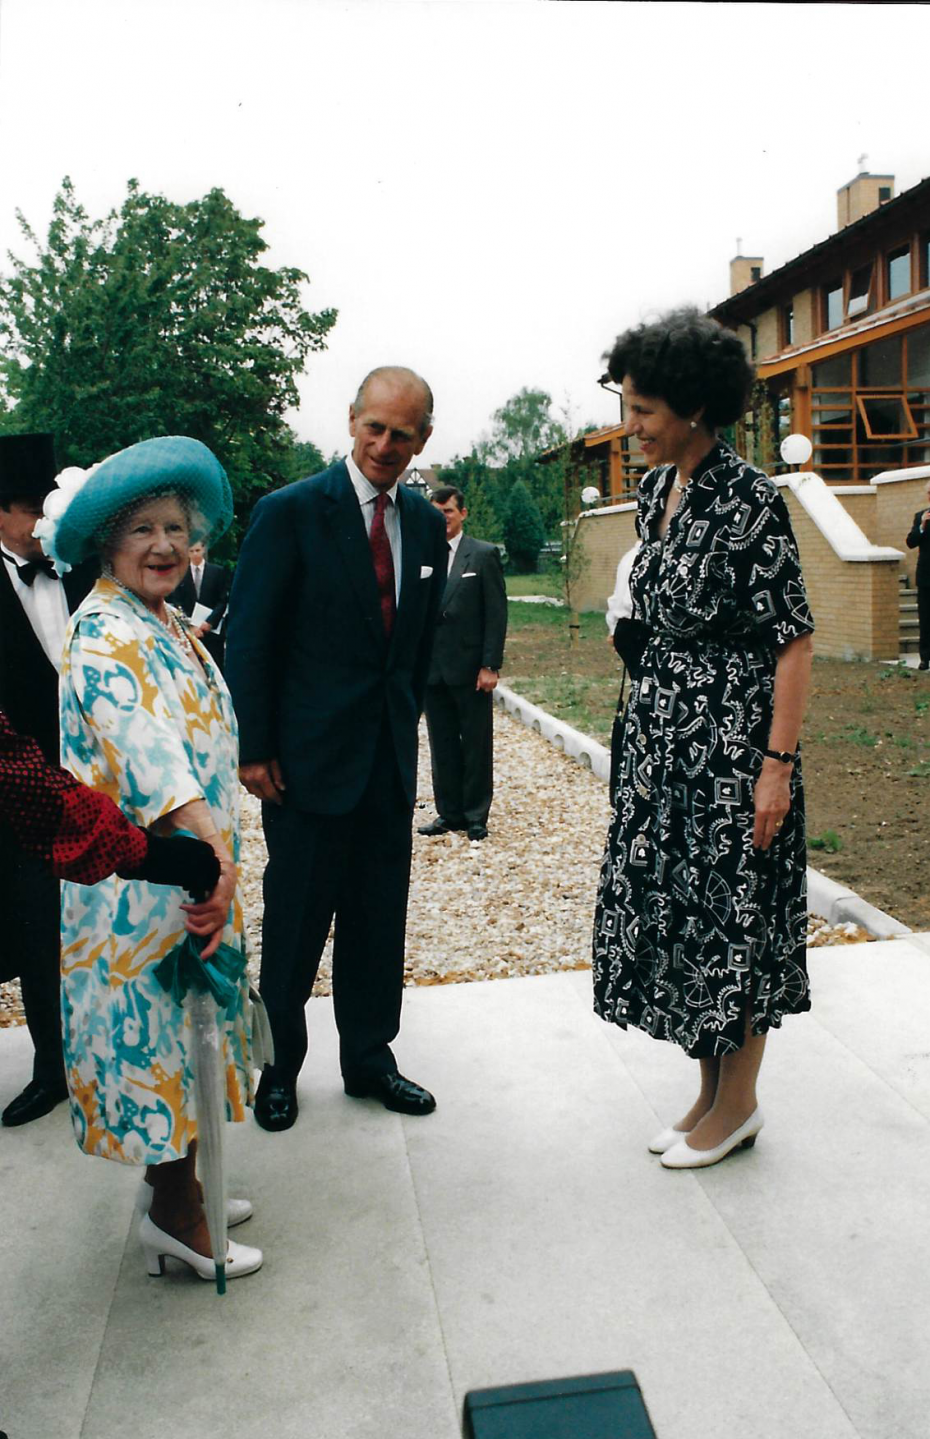 The Queen Mother and The Duke of Edinburgh, Prince Philip, arriving at Wolfson Court in June 1993, greeted by former Mistress, Ms Juliet Campbell (Archive Reference: GCPH 12/1/11, photographer unknown).